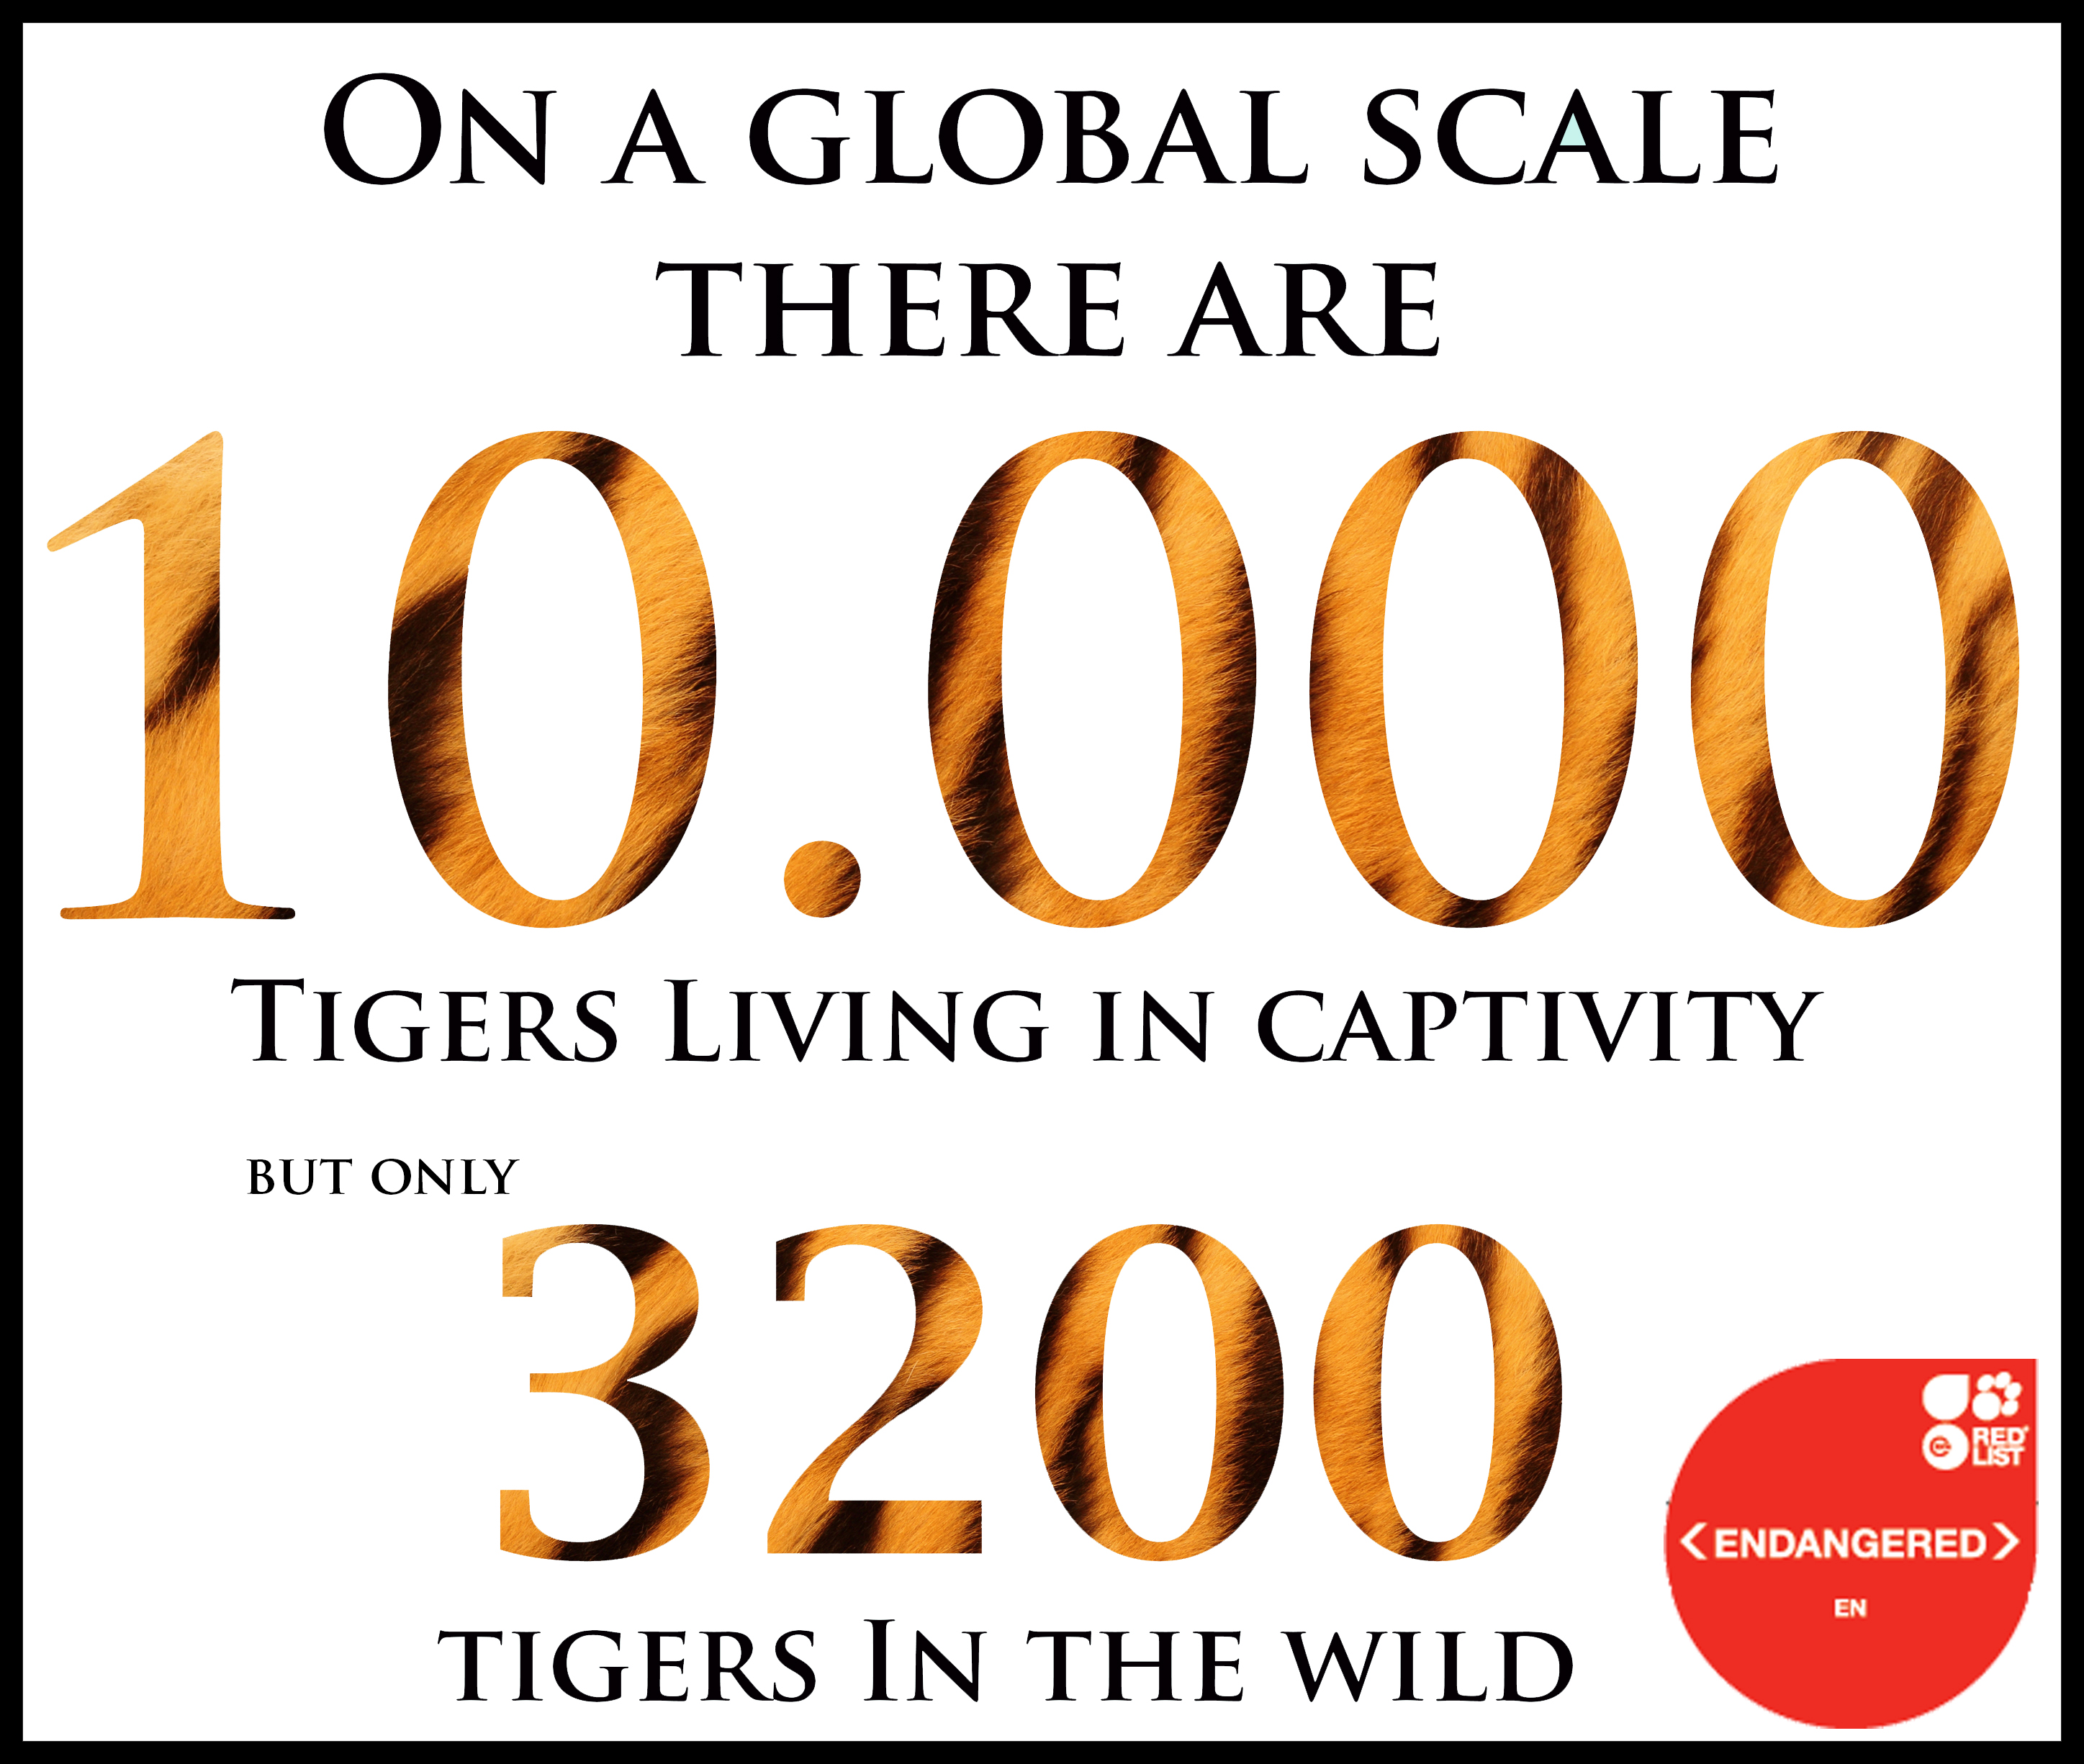 tigers in wild and captivity4